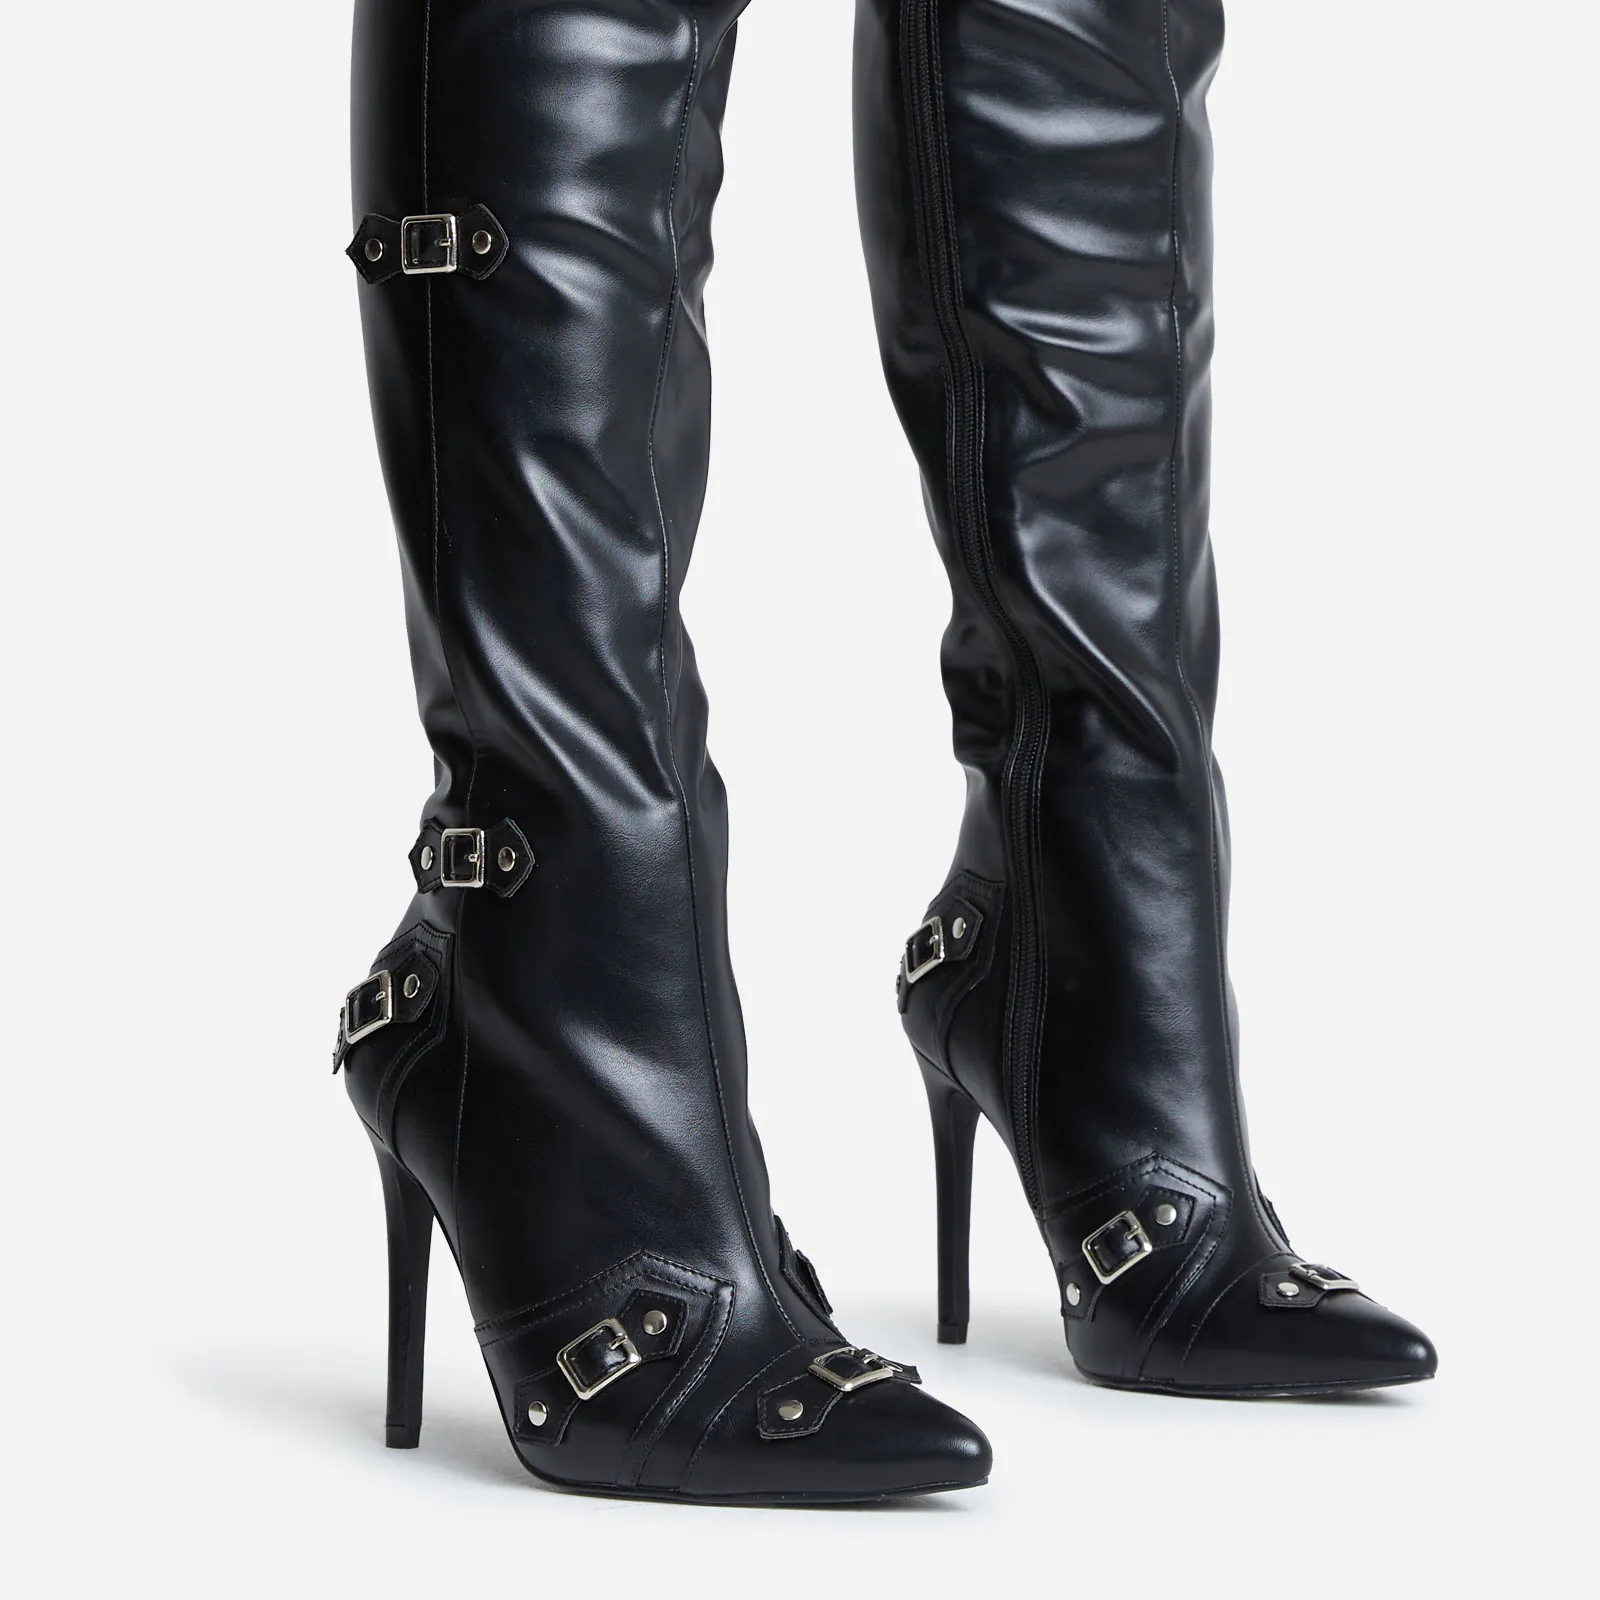 Raw-Love Buckle Detail Pointed Toe Over The Knee Thigh High Long Stiletto Heel Boot In Black Faux Leather